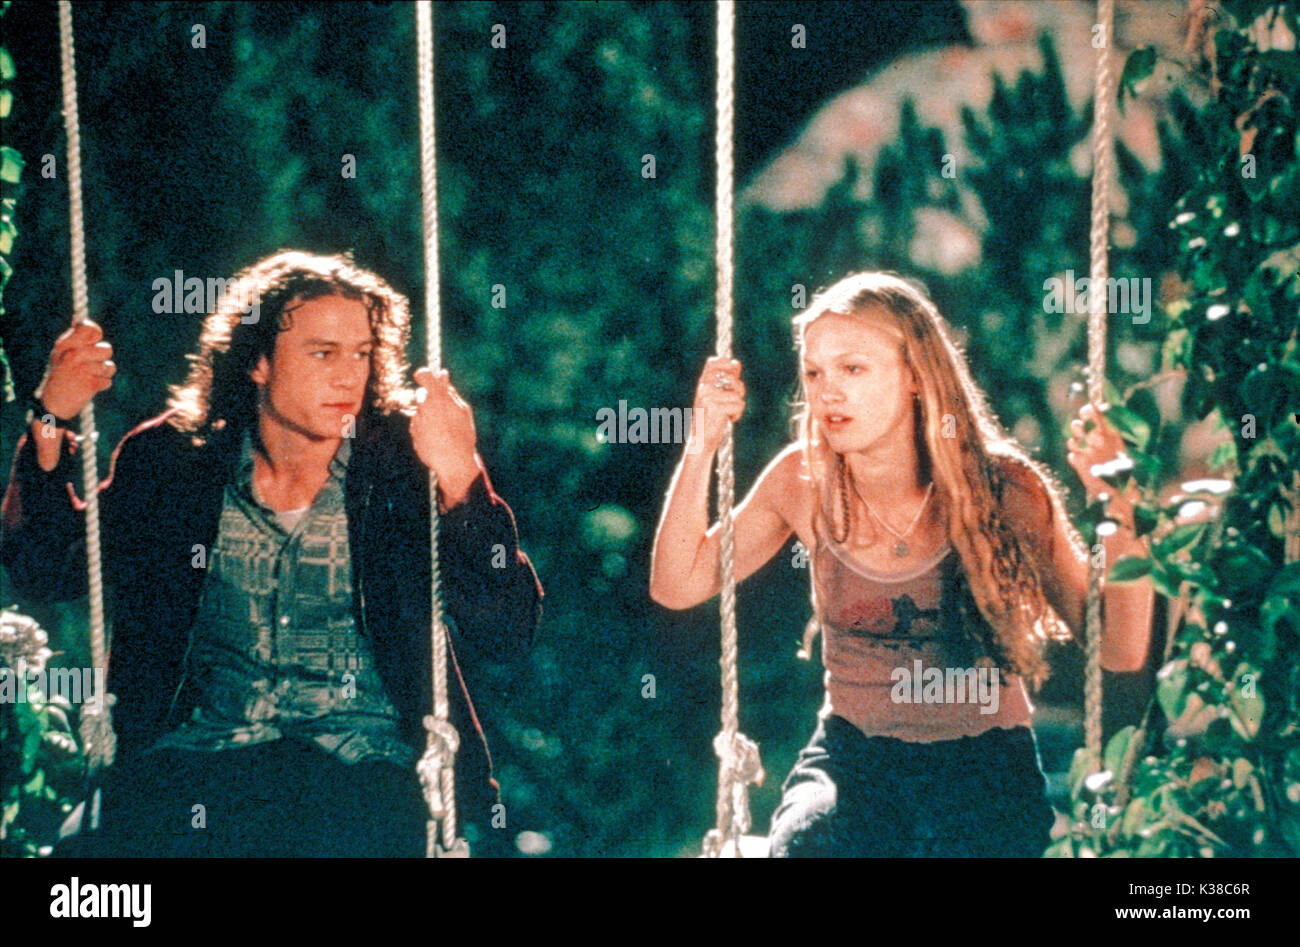 10 THINGS I HATE ABOUT YOU Heath Ledger, JULIA STILES Date : 1999 Banque D'Images